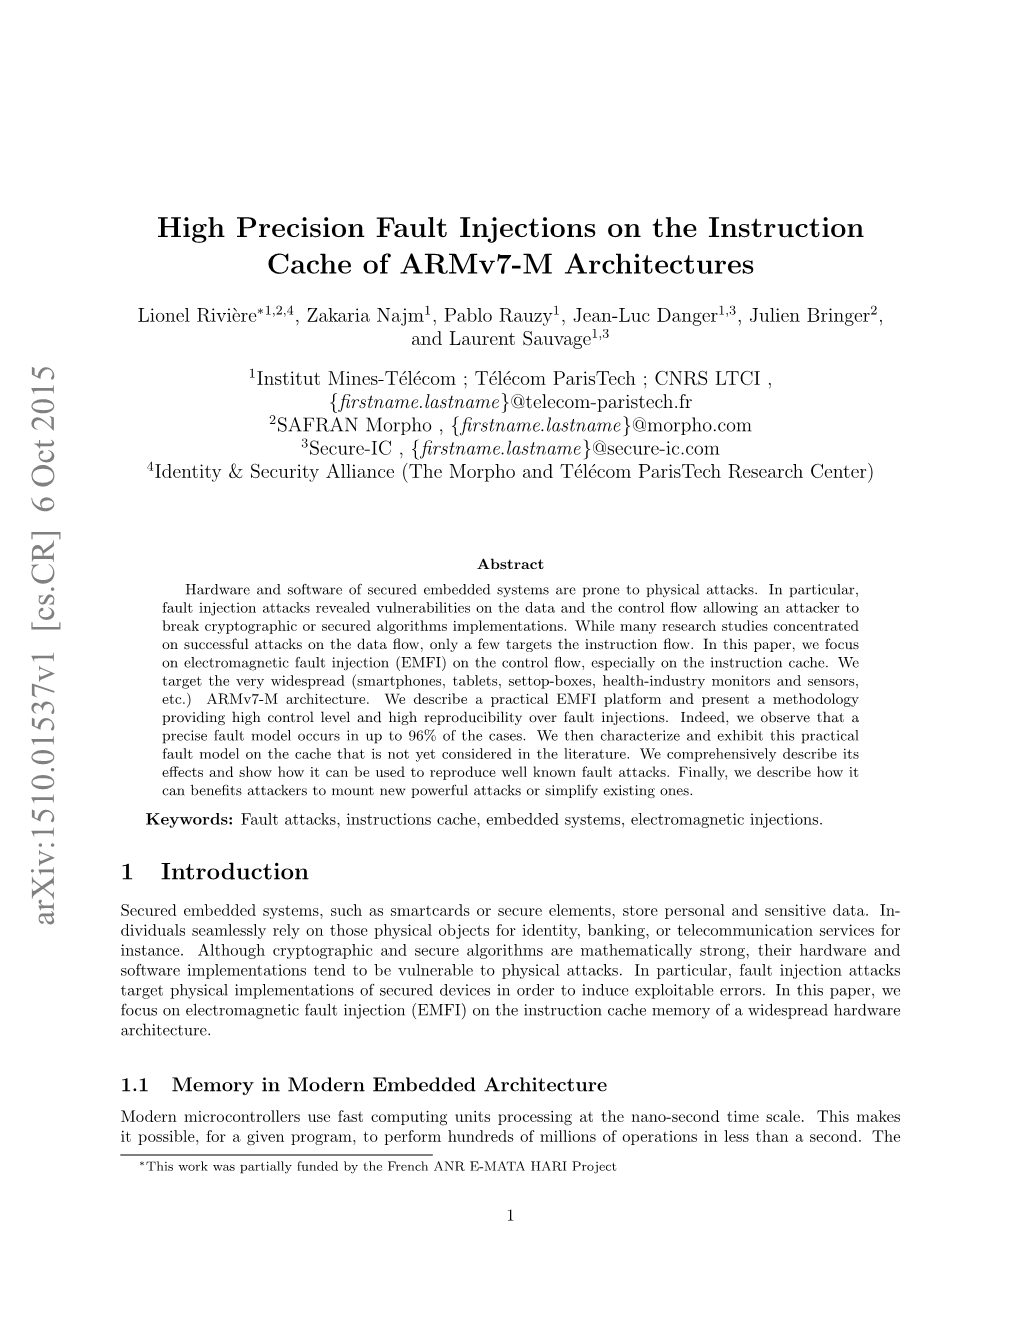 High Precision Fault Injections on the Instruction Cache of Armv7-M Architectures